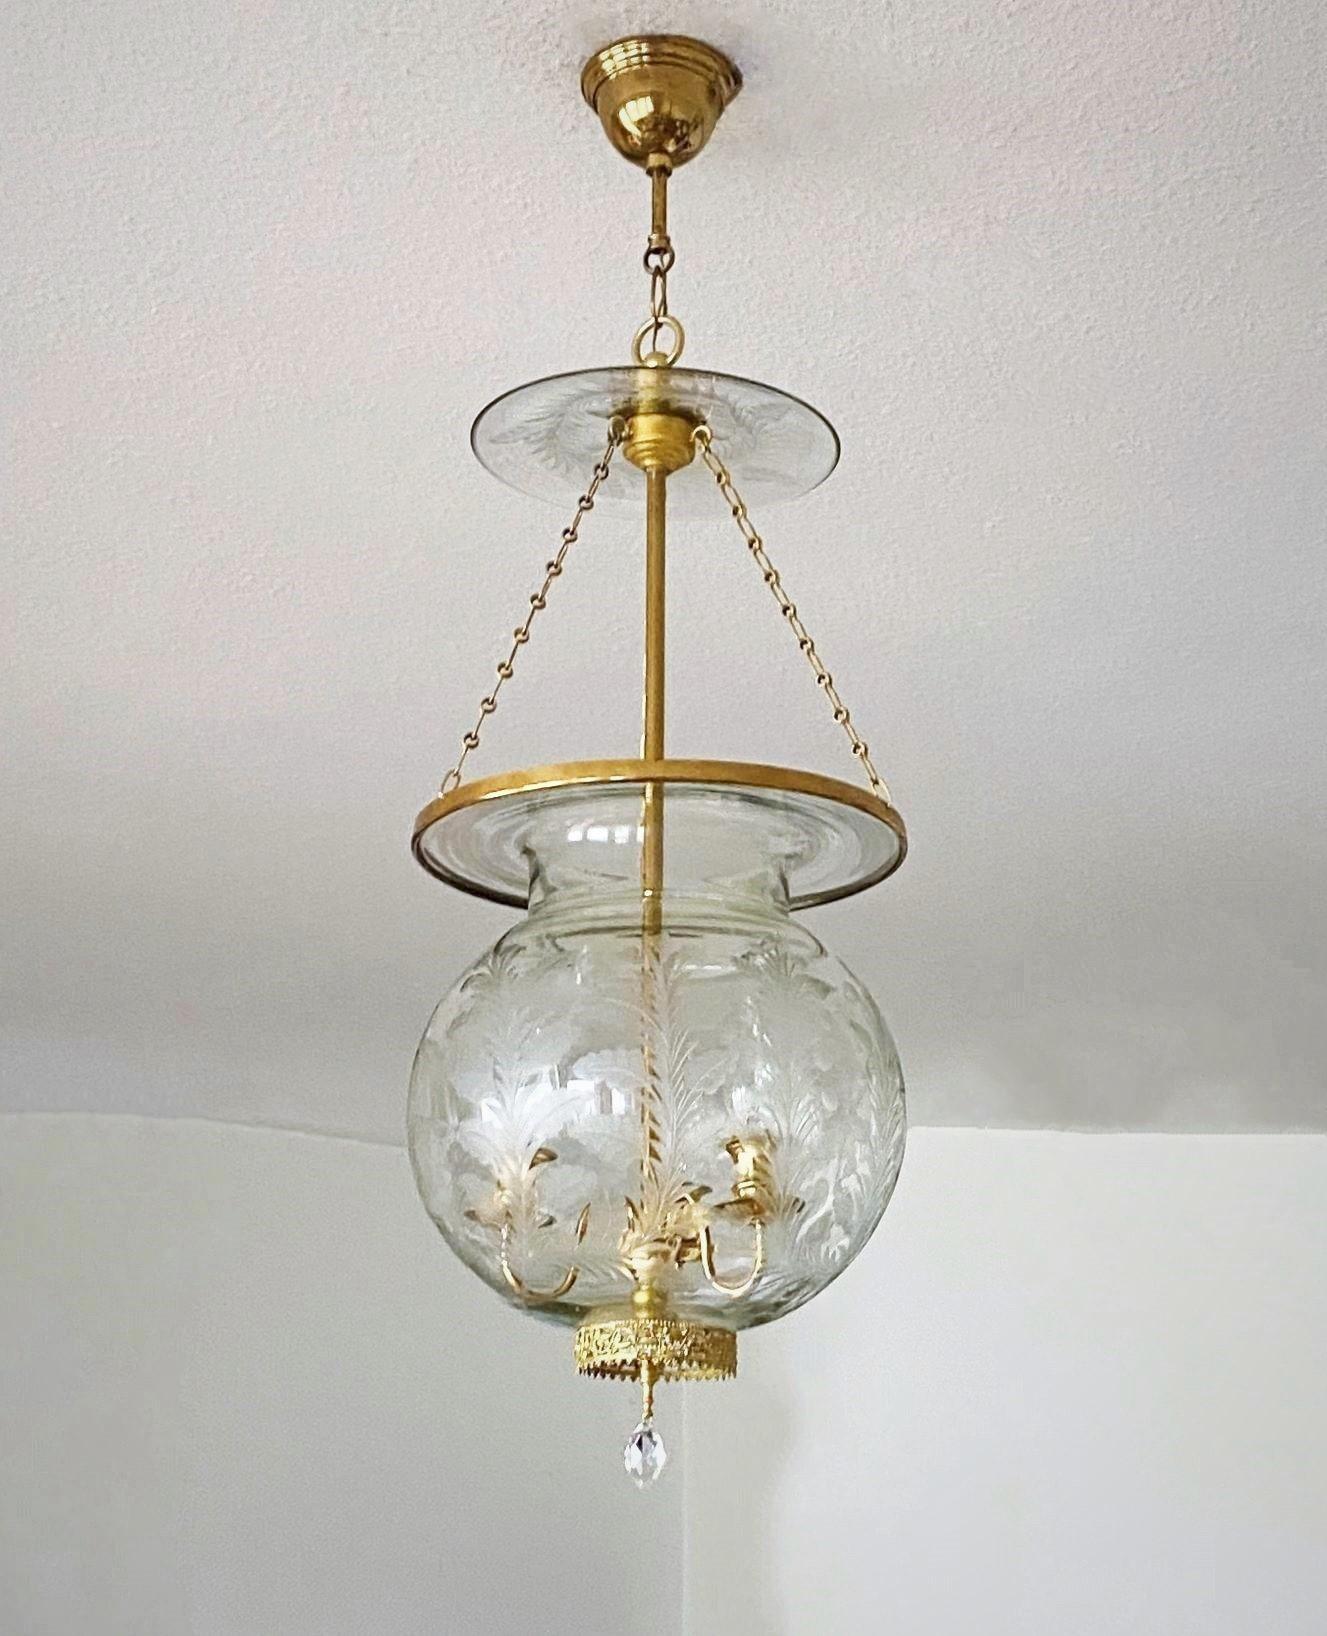 One of kind hand blown clear cut glass chapel lantern with a central three-bulb candelabra cluster and elegant brass mounts, France, 1910-1920. The glass bowl and upper glass plate complete with hand-cut palm, other vegetal and geometric motifs